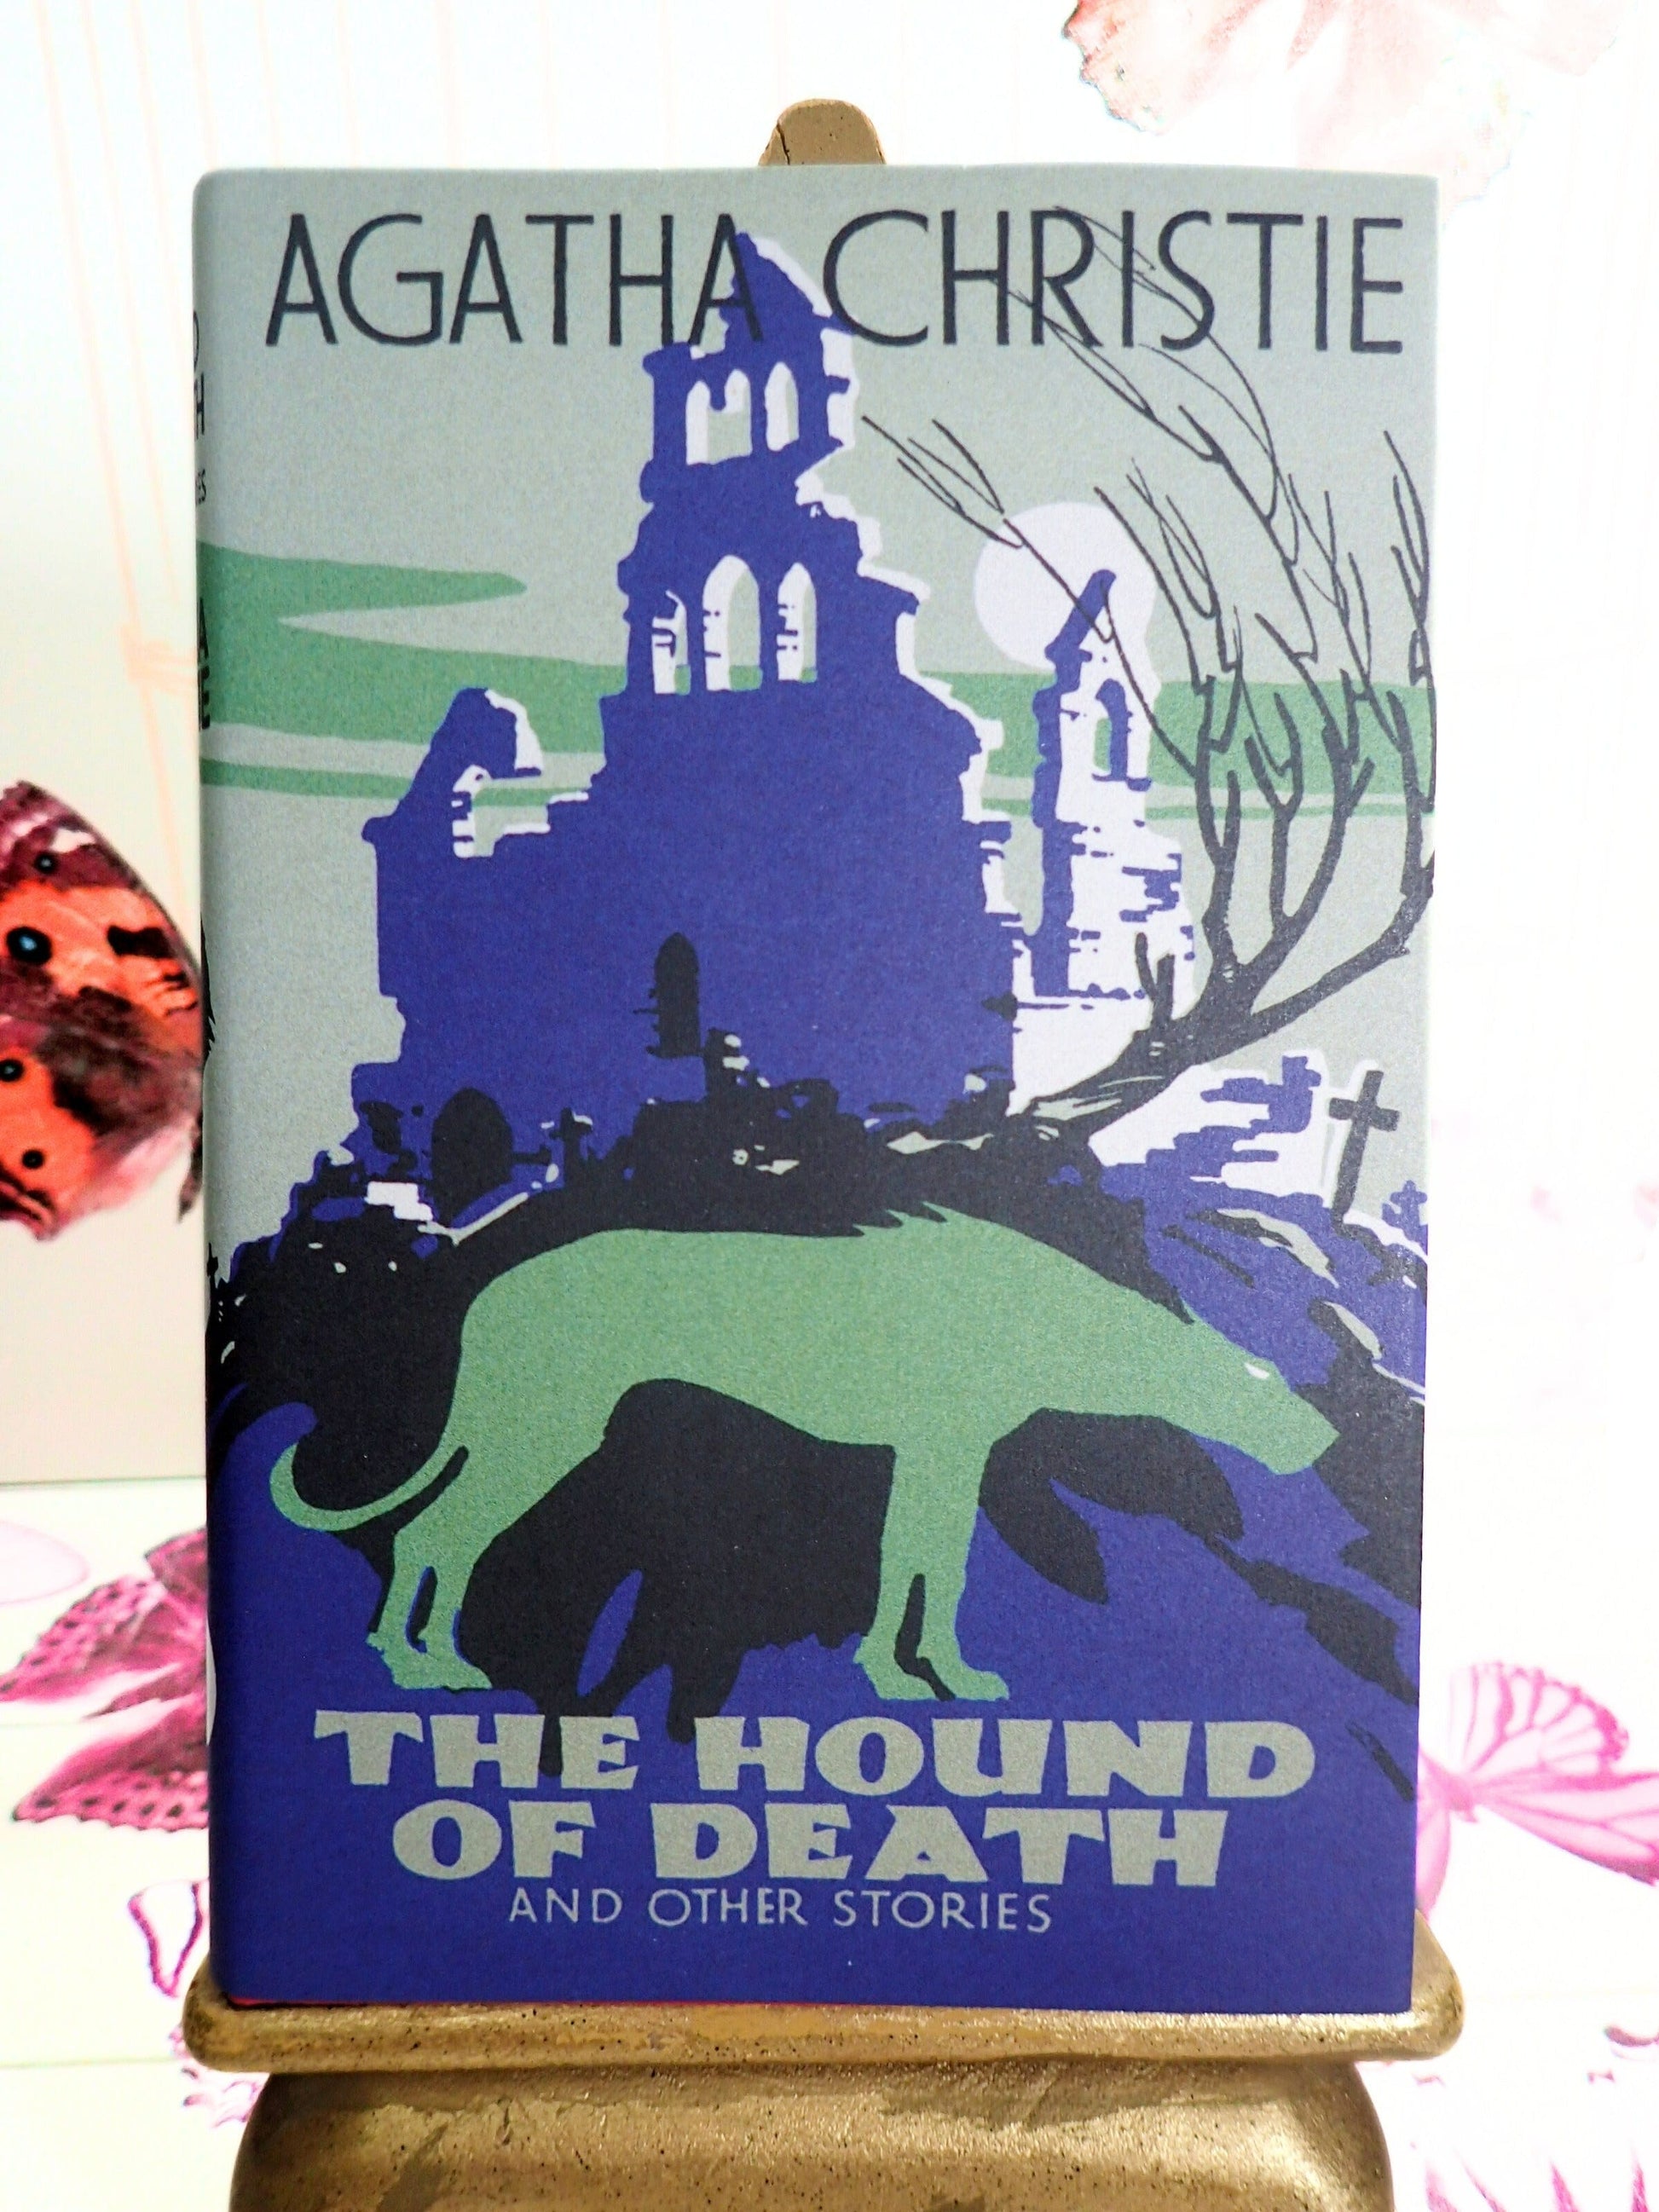 The Hound of Death Agatha Christie And Other Stories Facsimile 2014 blue and green cover. 